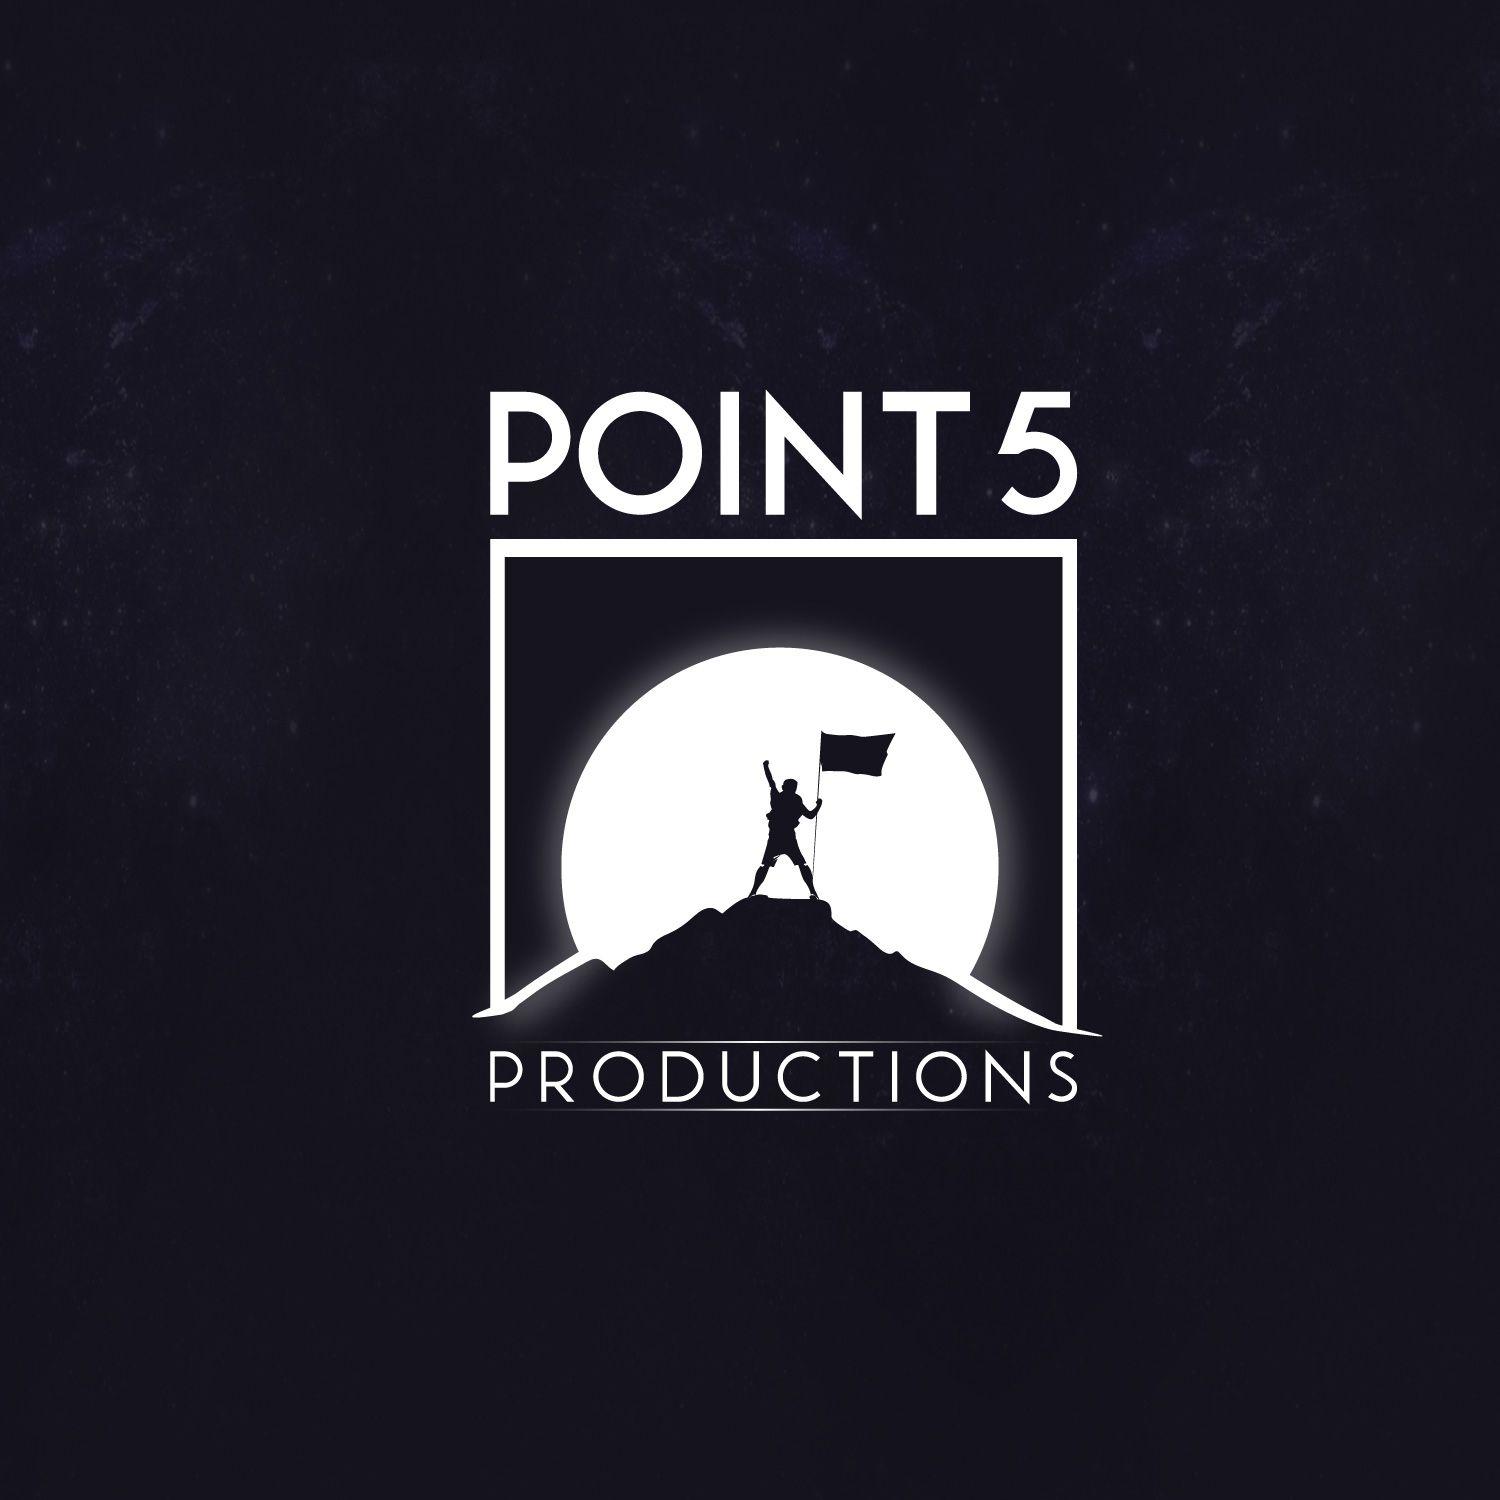 Film Production Logo - Conservative, Serious, Film Production Logo Design for Point 5